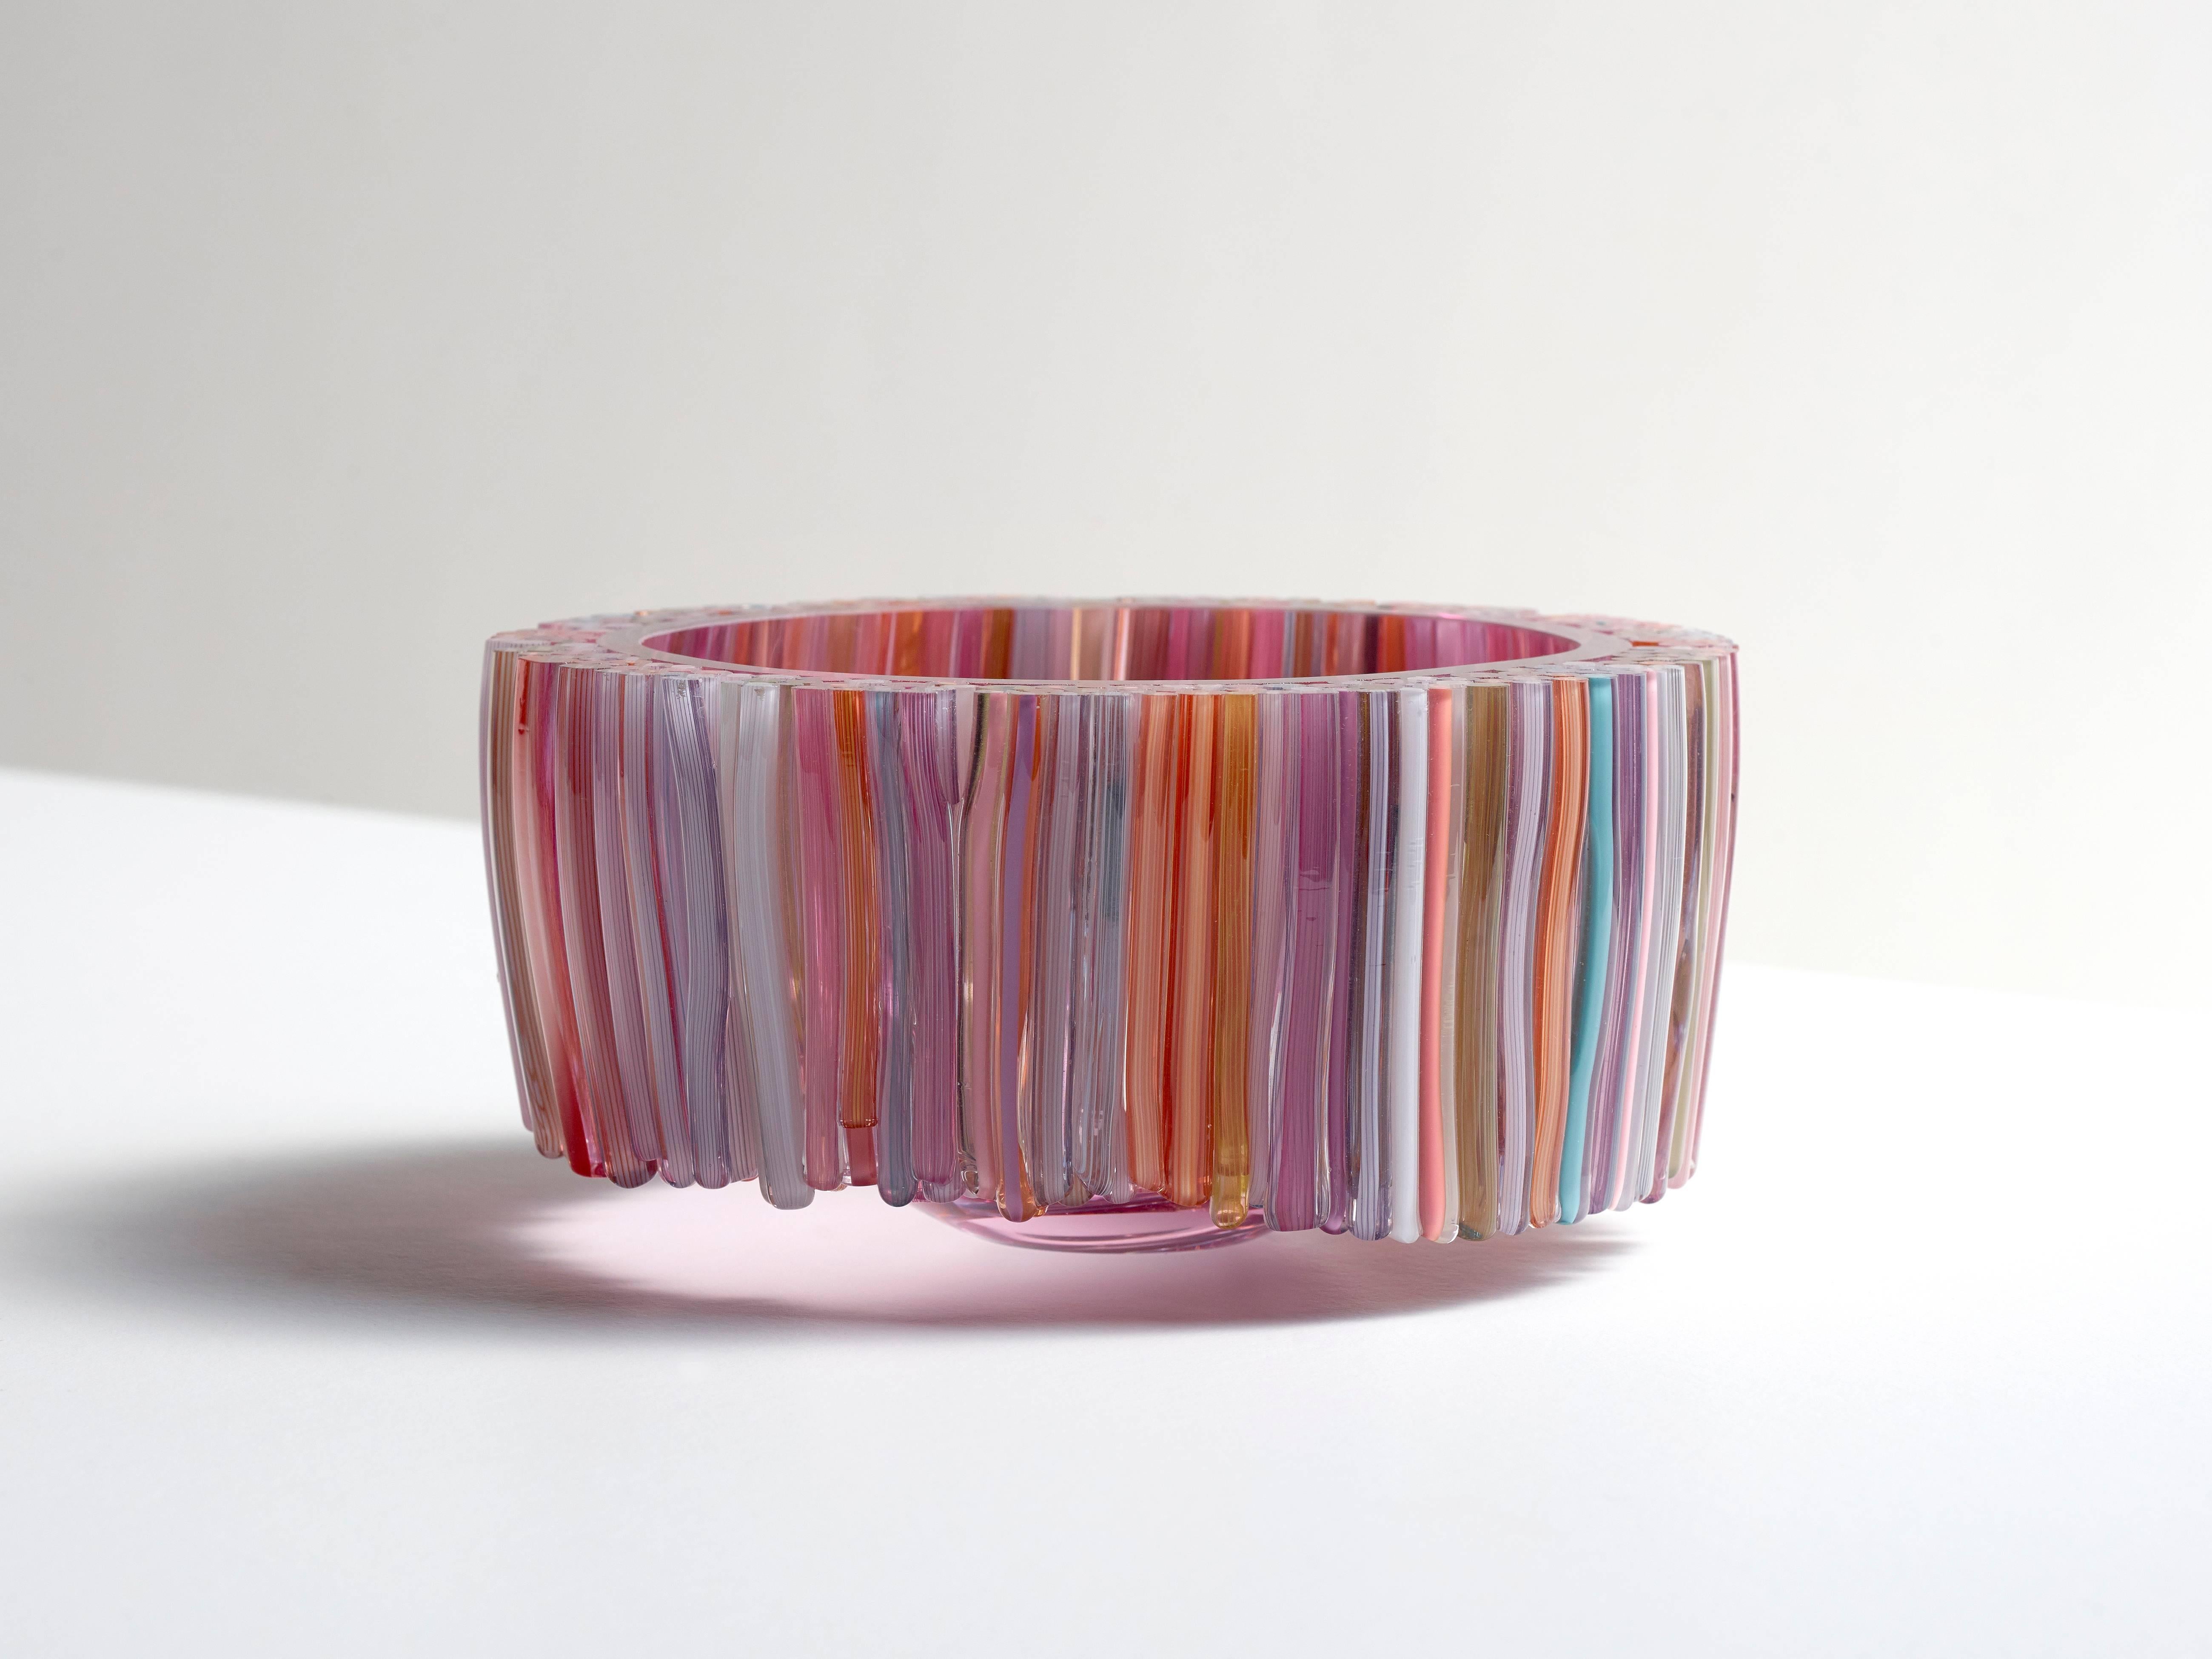 This beautiful blown glass red bowl is decorated with hand crafted glass threads that are melted to the body of the glass vessel. The many colors of the threads like, green, pink, blue, orange and white are stylishly combined, resulting in a playful